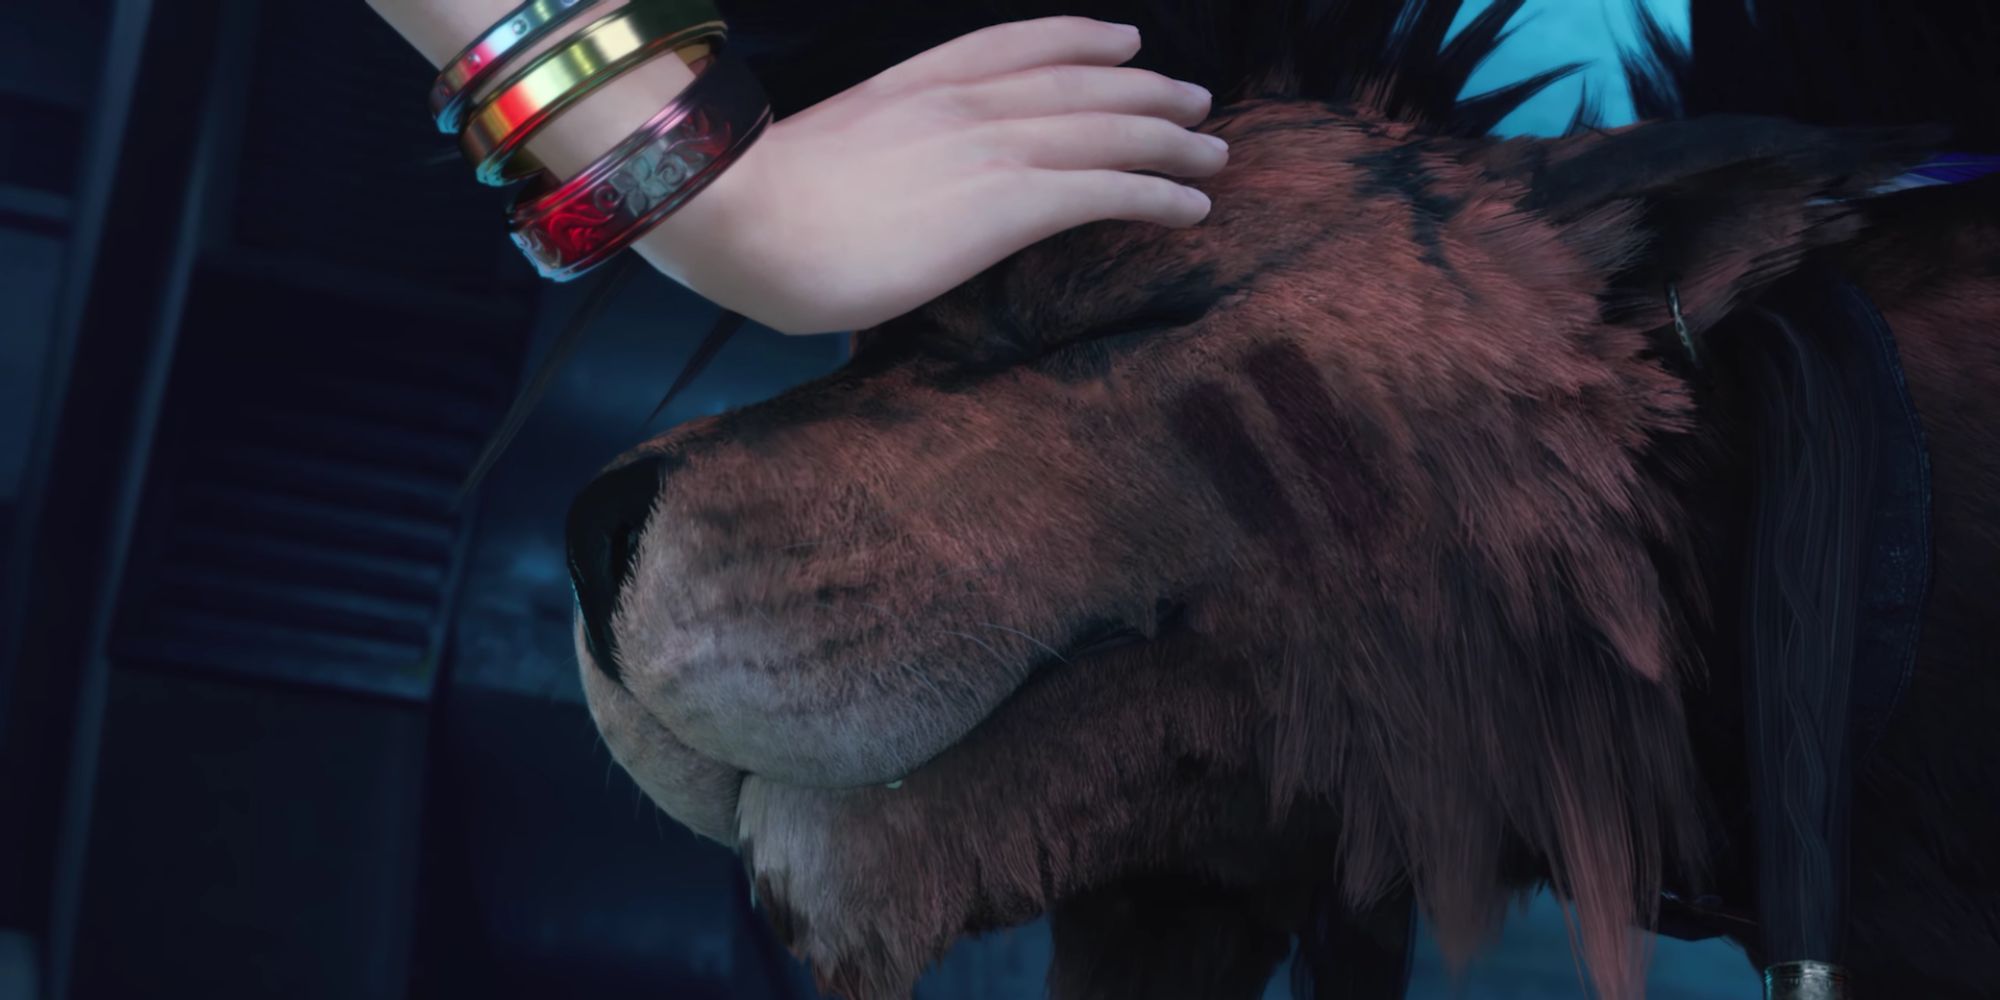 Red XIII being stroked by Aerith in Final Fantasy 7 Remake.